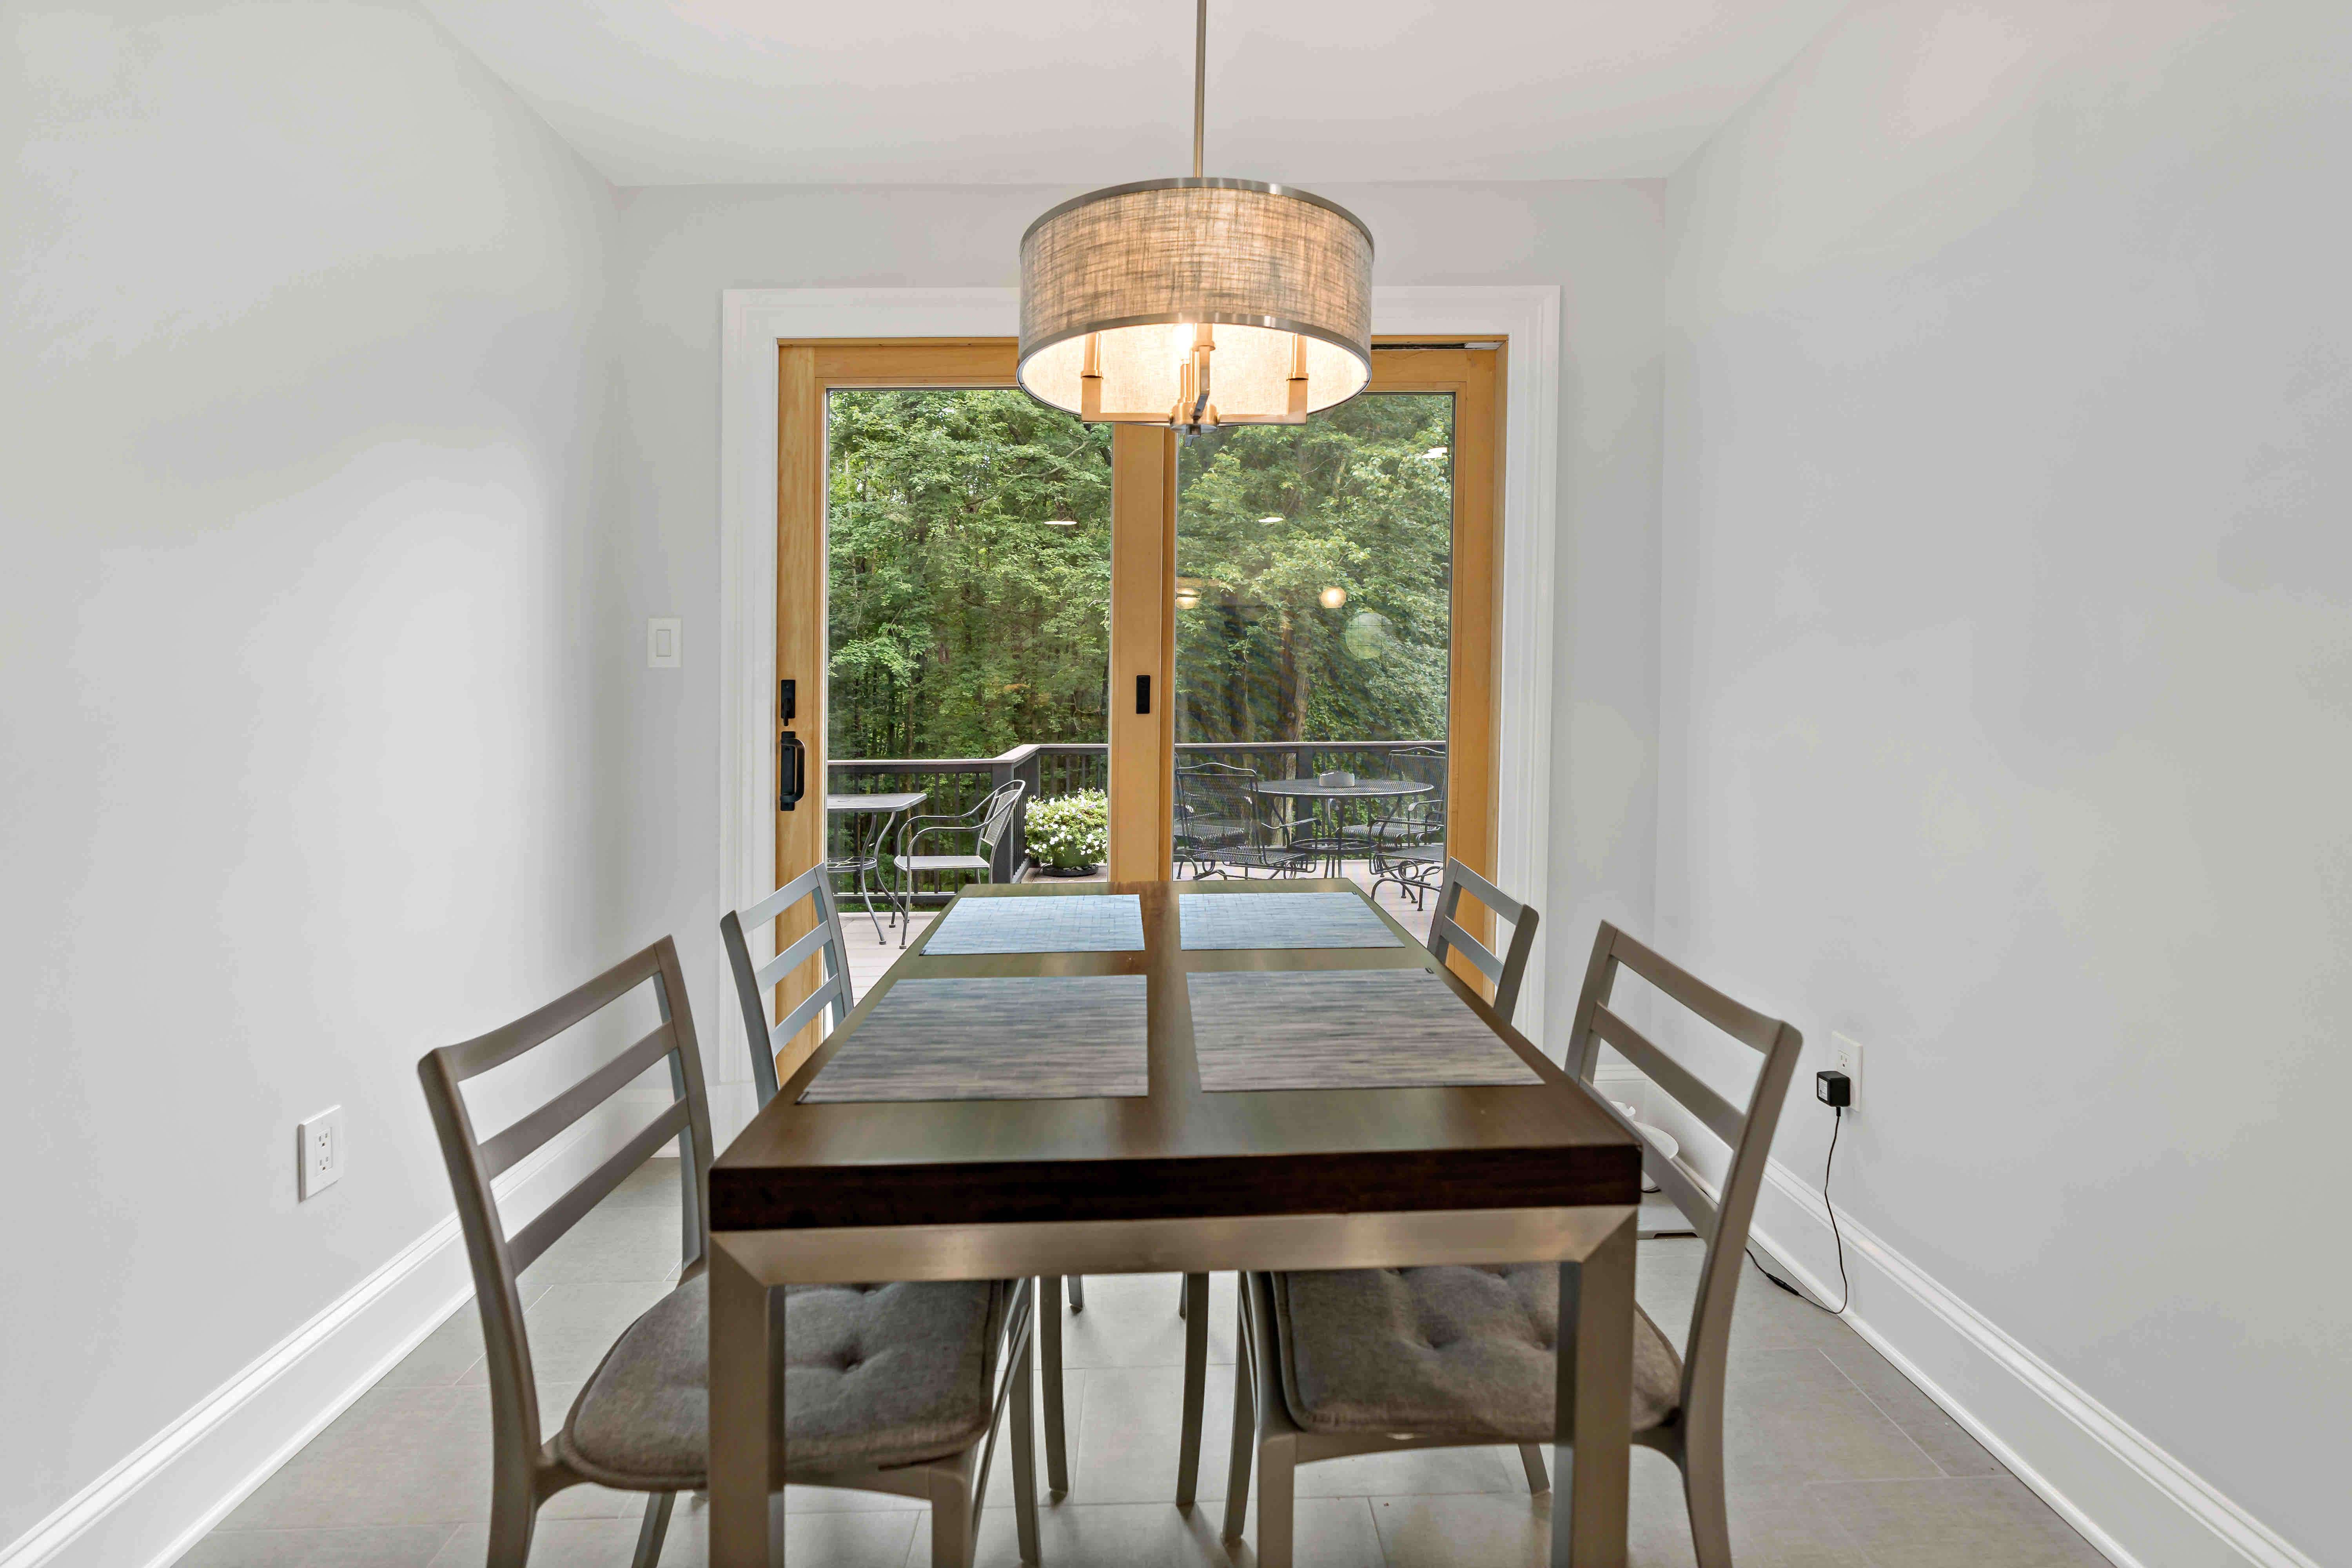 Kitchen table with round pendant lighting